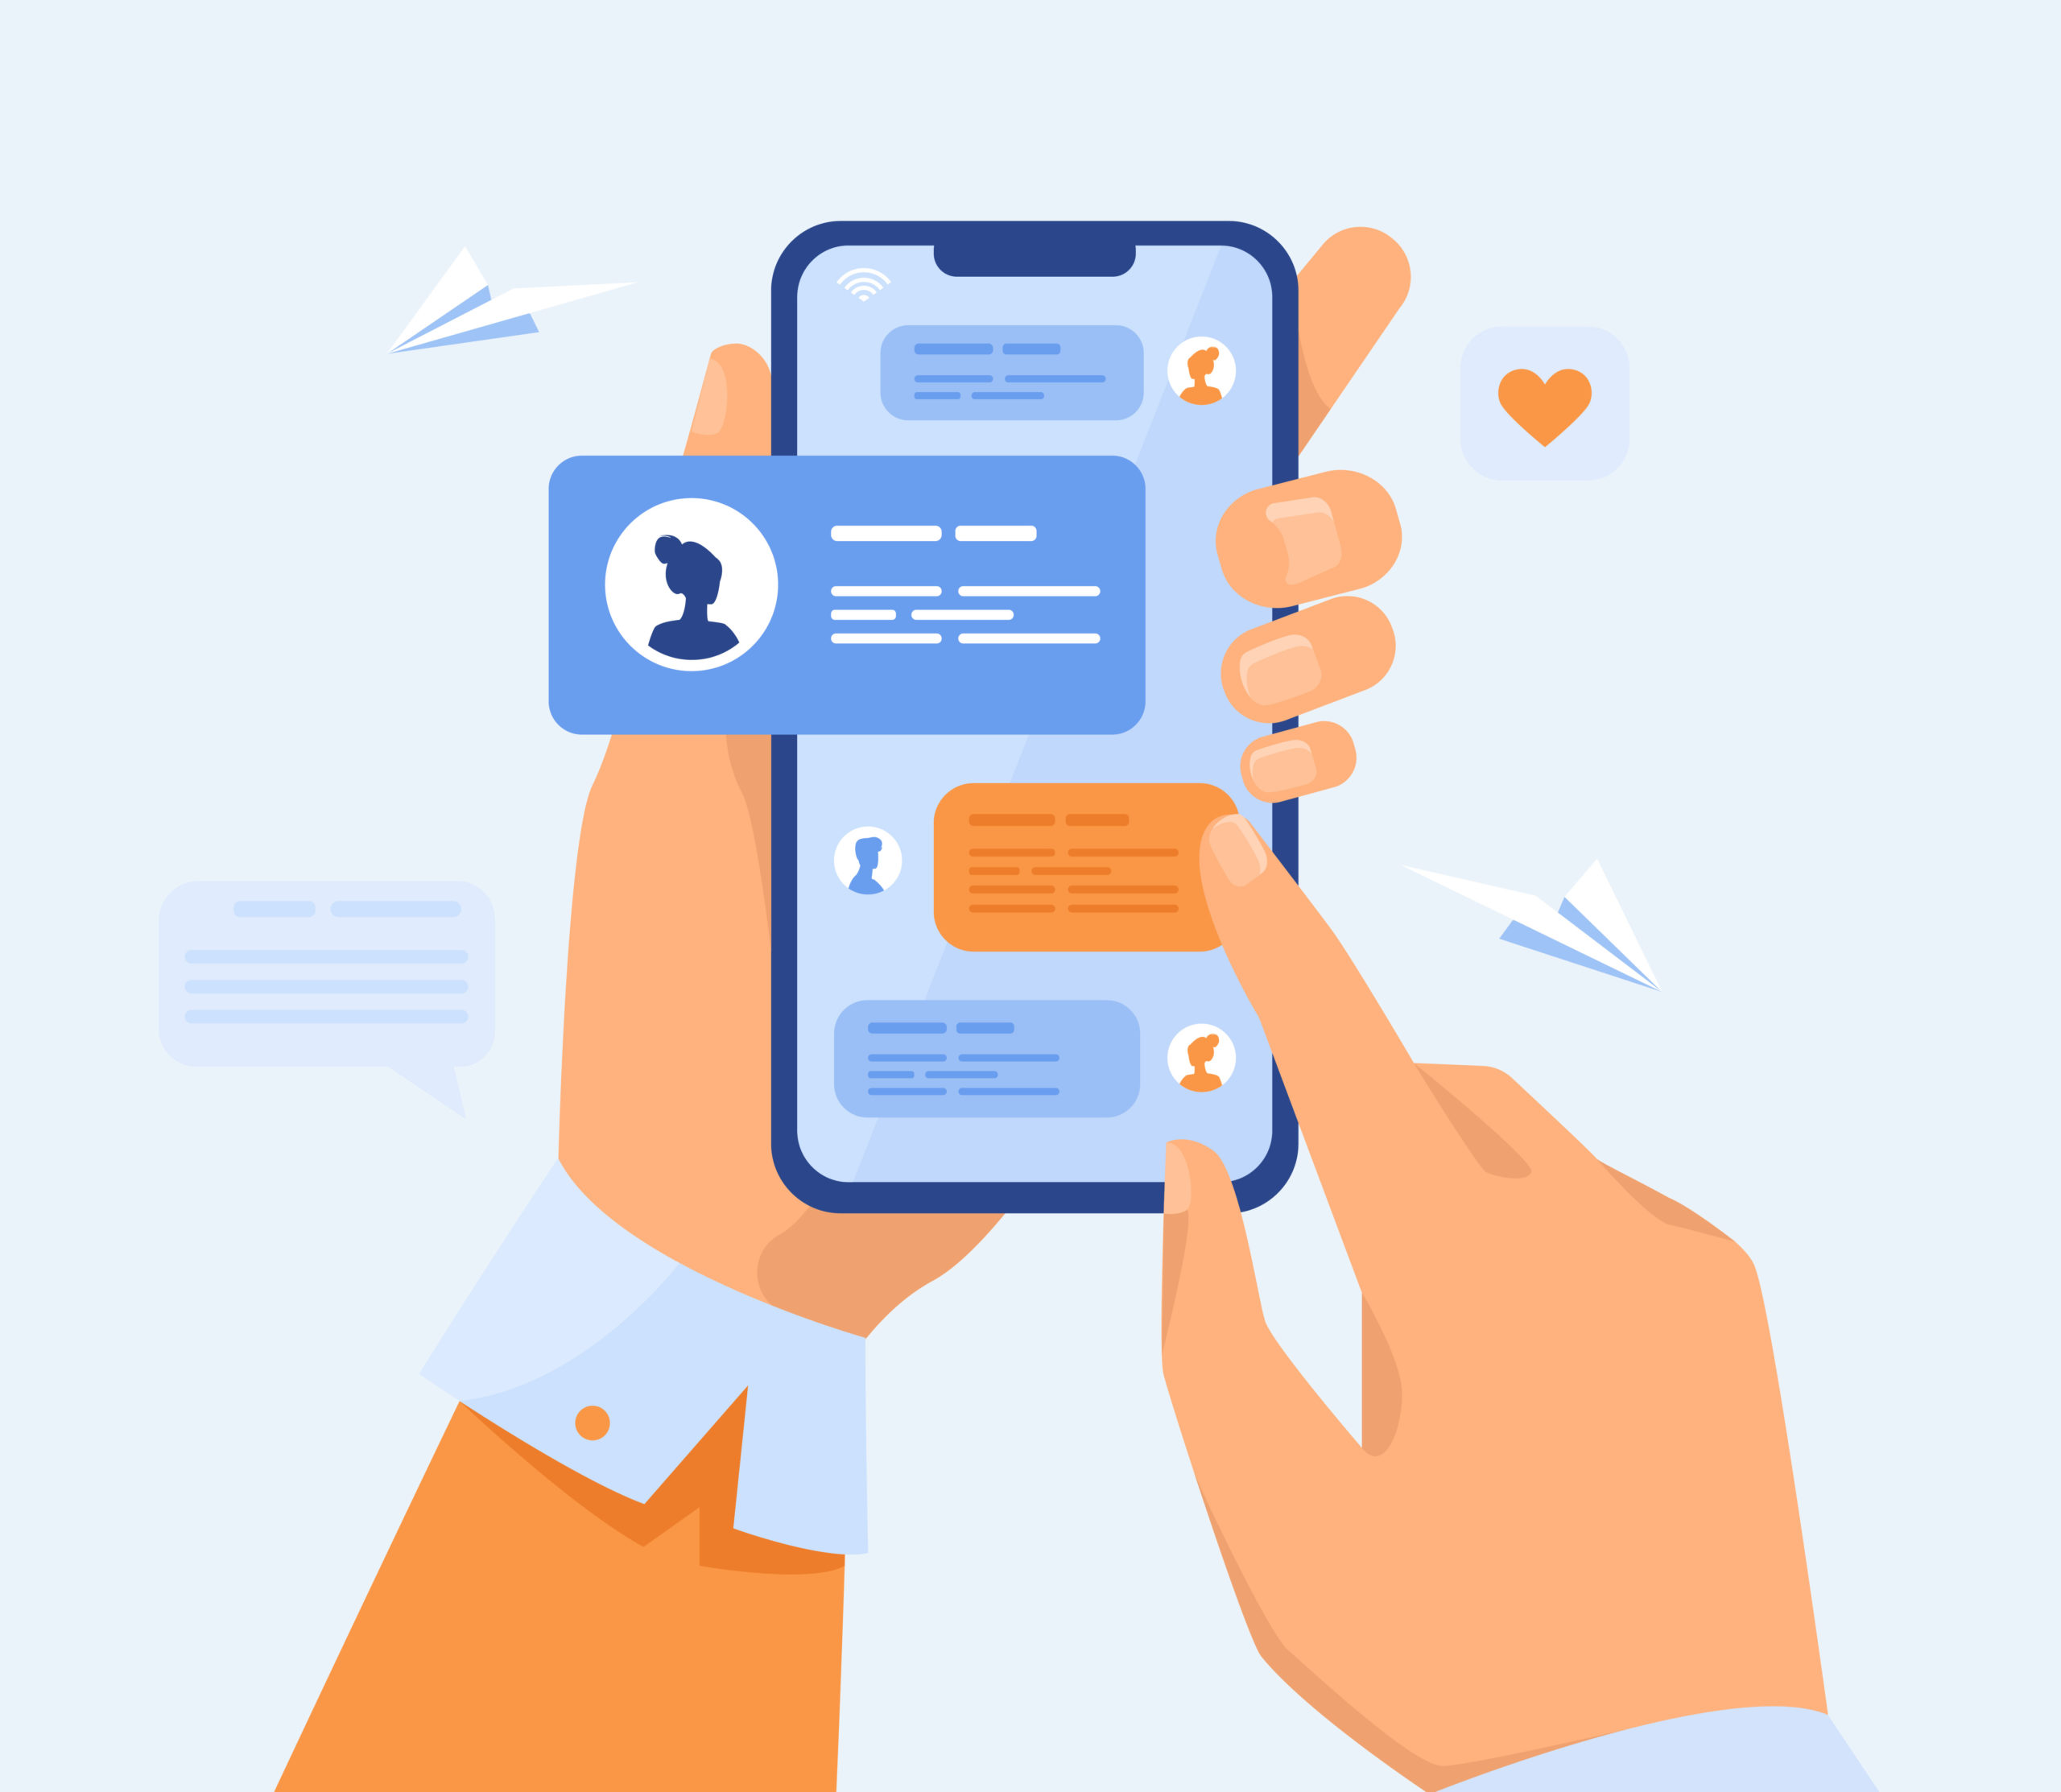 Human hand holding mobile phone with text messages. Person touching screen with chat conversation flat vector illustration. Phone communication concept for banner, website design or landing web page